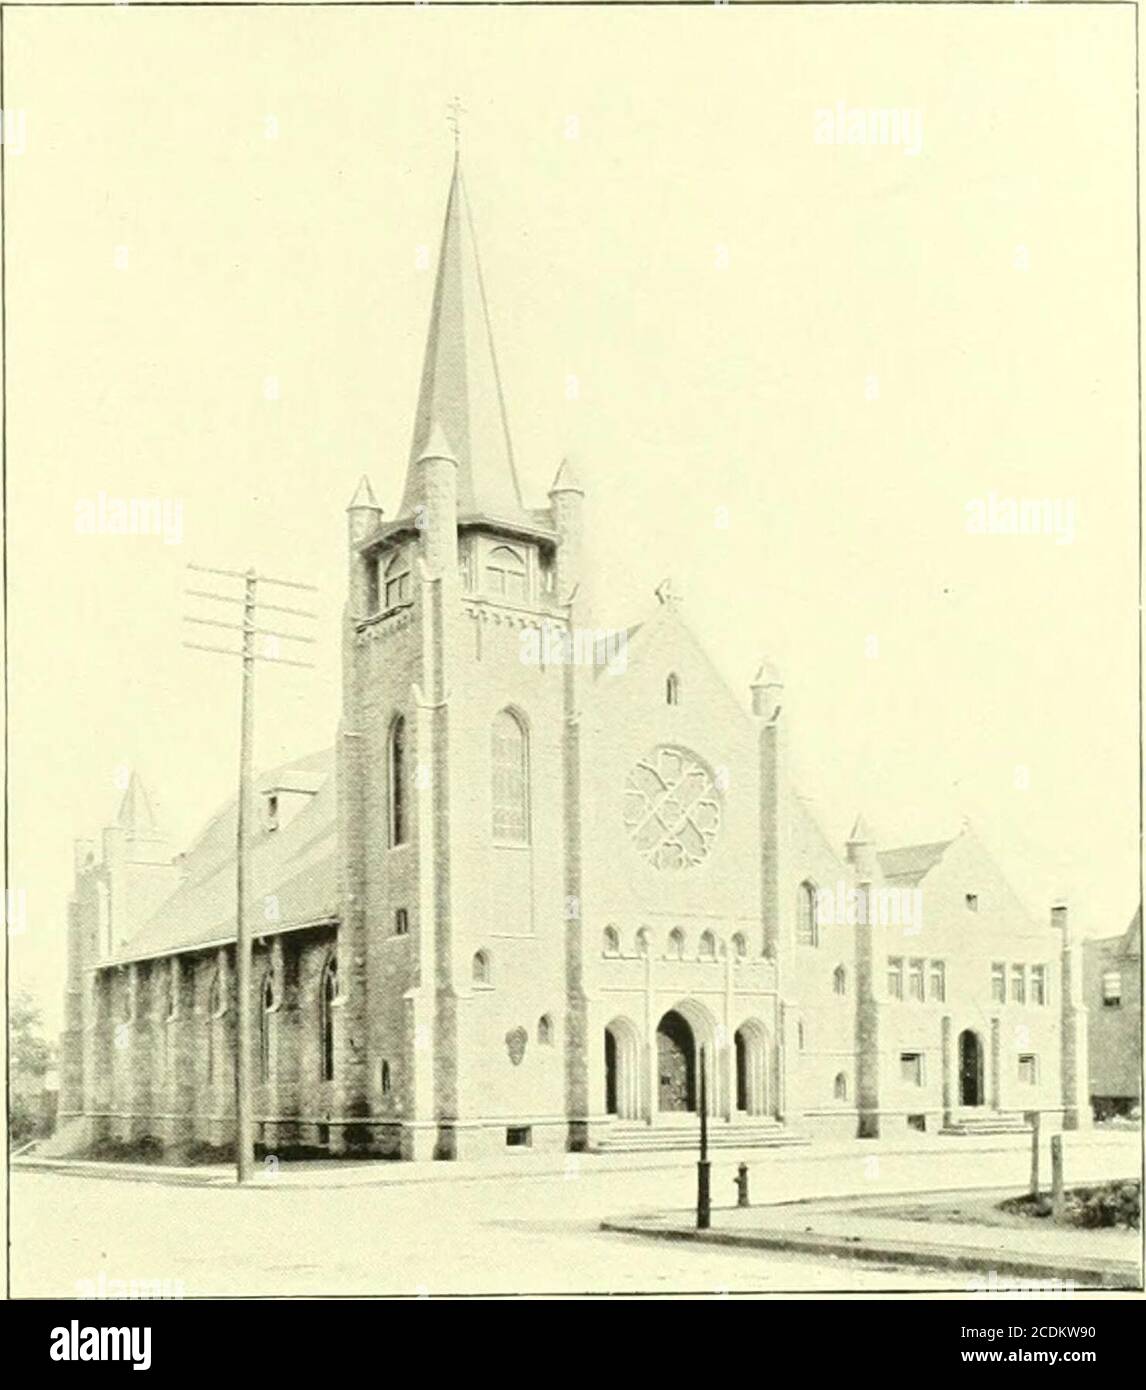 . Essex county, N.J., illustrated . I. P. Ilrok.uv, a graduate of the New lirunswick Semi-nary, was ordained and installed jiastor. At the meeting of the general Synod in this city, June.1870, the corner-stone of the present structure w.islaid. In the the early spring of 1871, the church wasfinished an,! dedicated. The congregation has beenministered to liv seven pastors: Revs. I. P. Brokaw,C. R. Blauvelt. C. H. F. Kruger. Theodore Shaffer, I).Chas. Preyer, R. I. Millekin and J. N. Morris (1897). thepresent incumbent. Two of these Revs C. H. F. Krugerand R. P. Millekin, died in its pastoral se Stock Photo